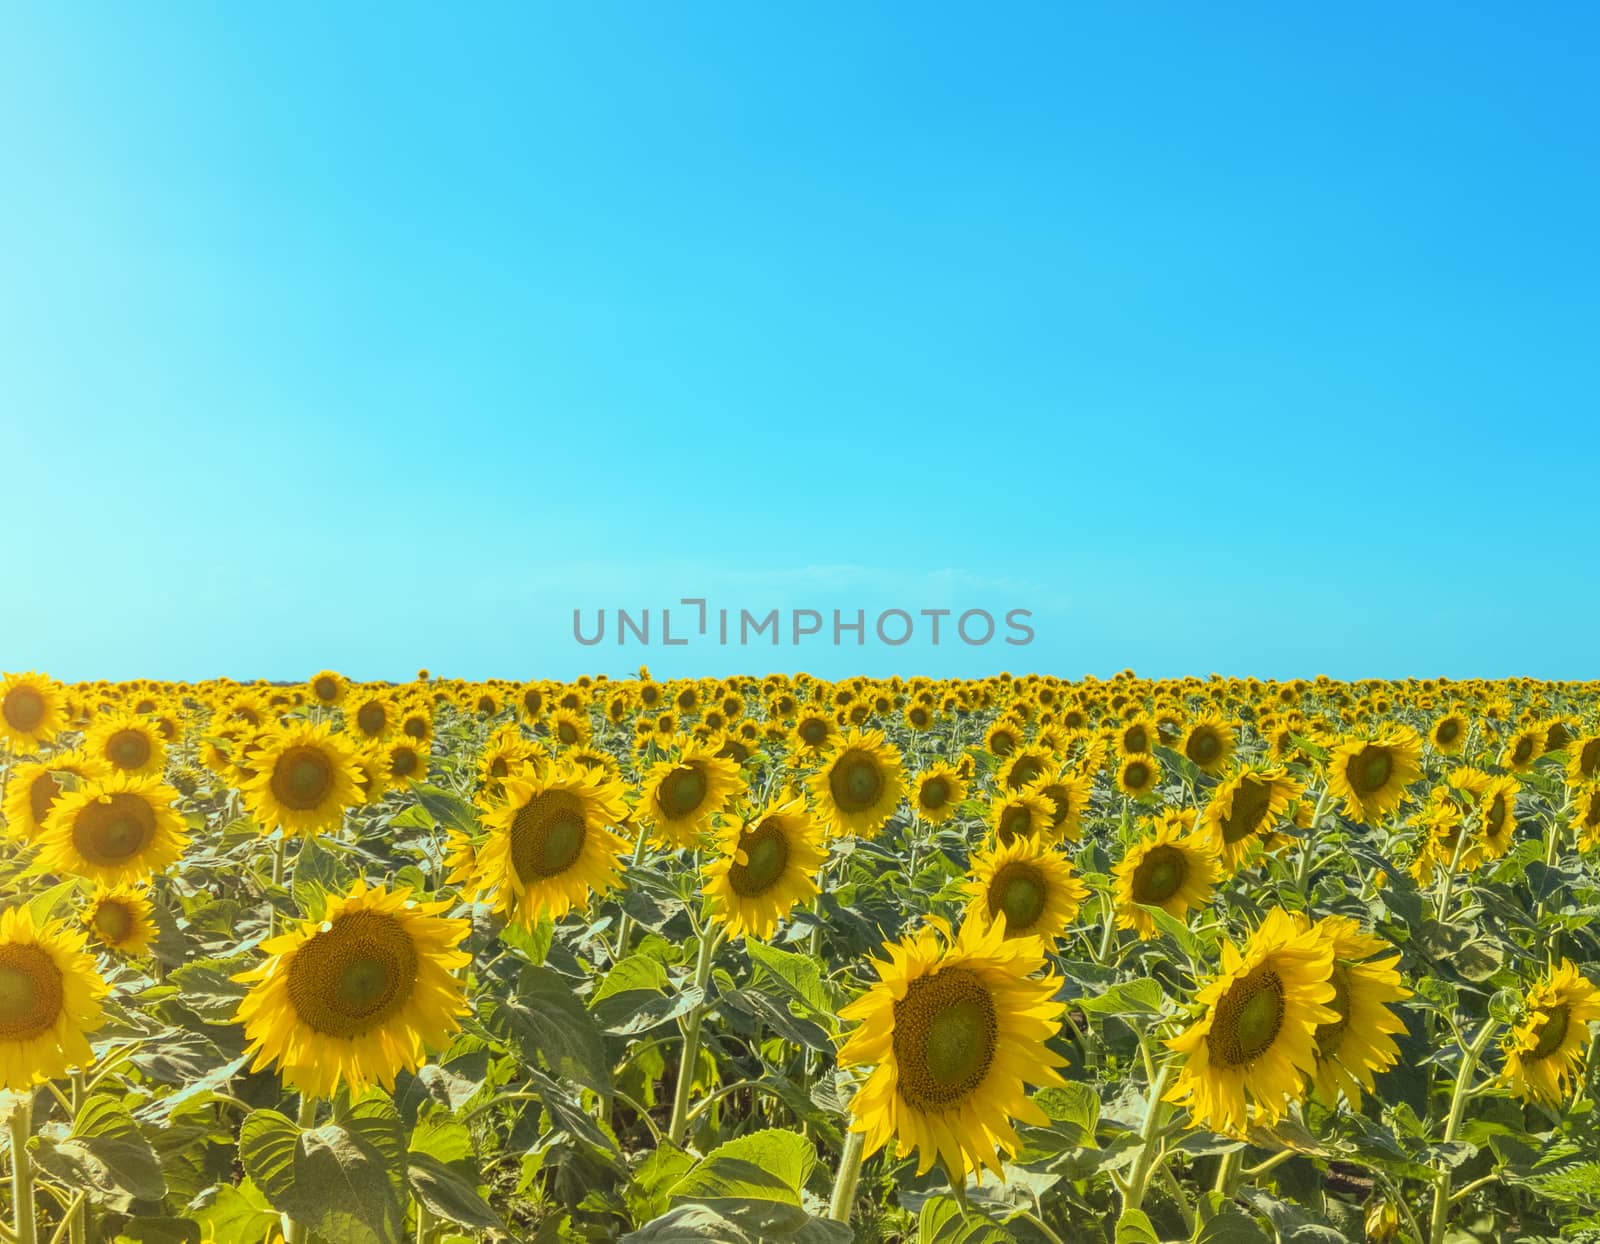 Sunflower field with sun glare and blue sky. Landscape with copy space. Stock photography.